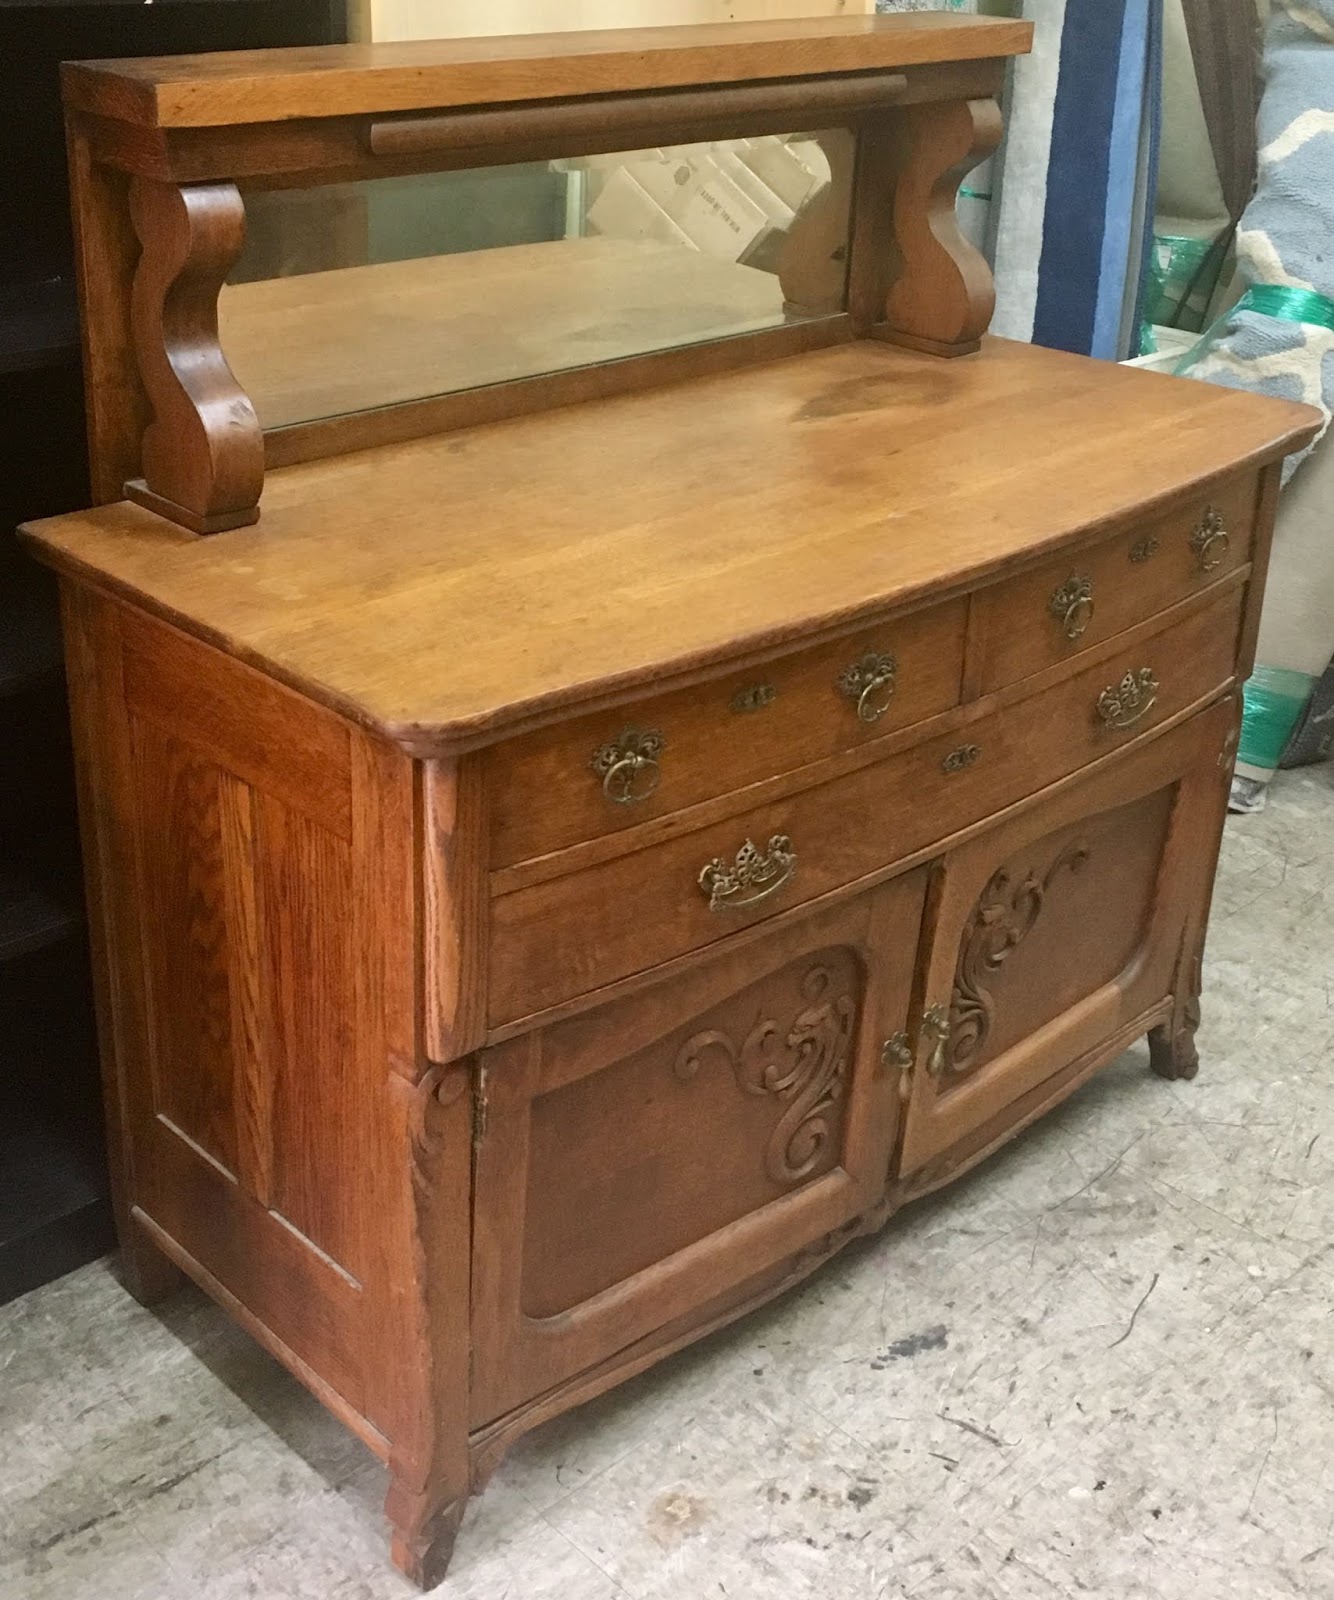 Uhuru Furniture & Collectibles: Oak Empire Buffet with Mirror - $295 SOLD